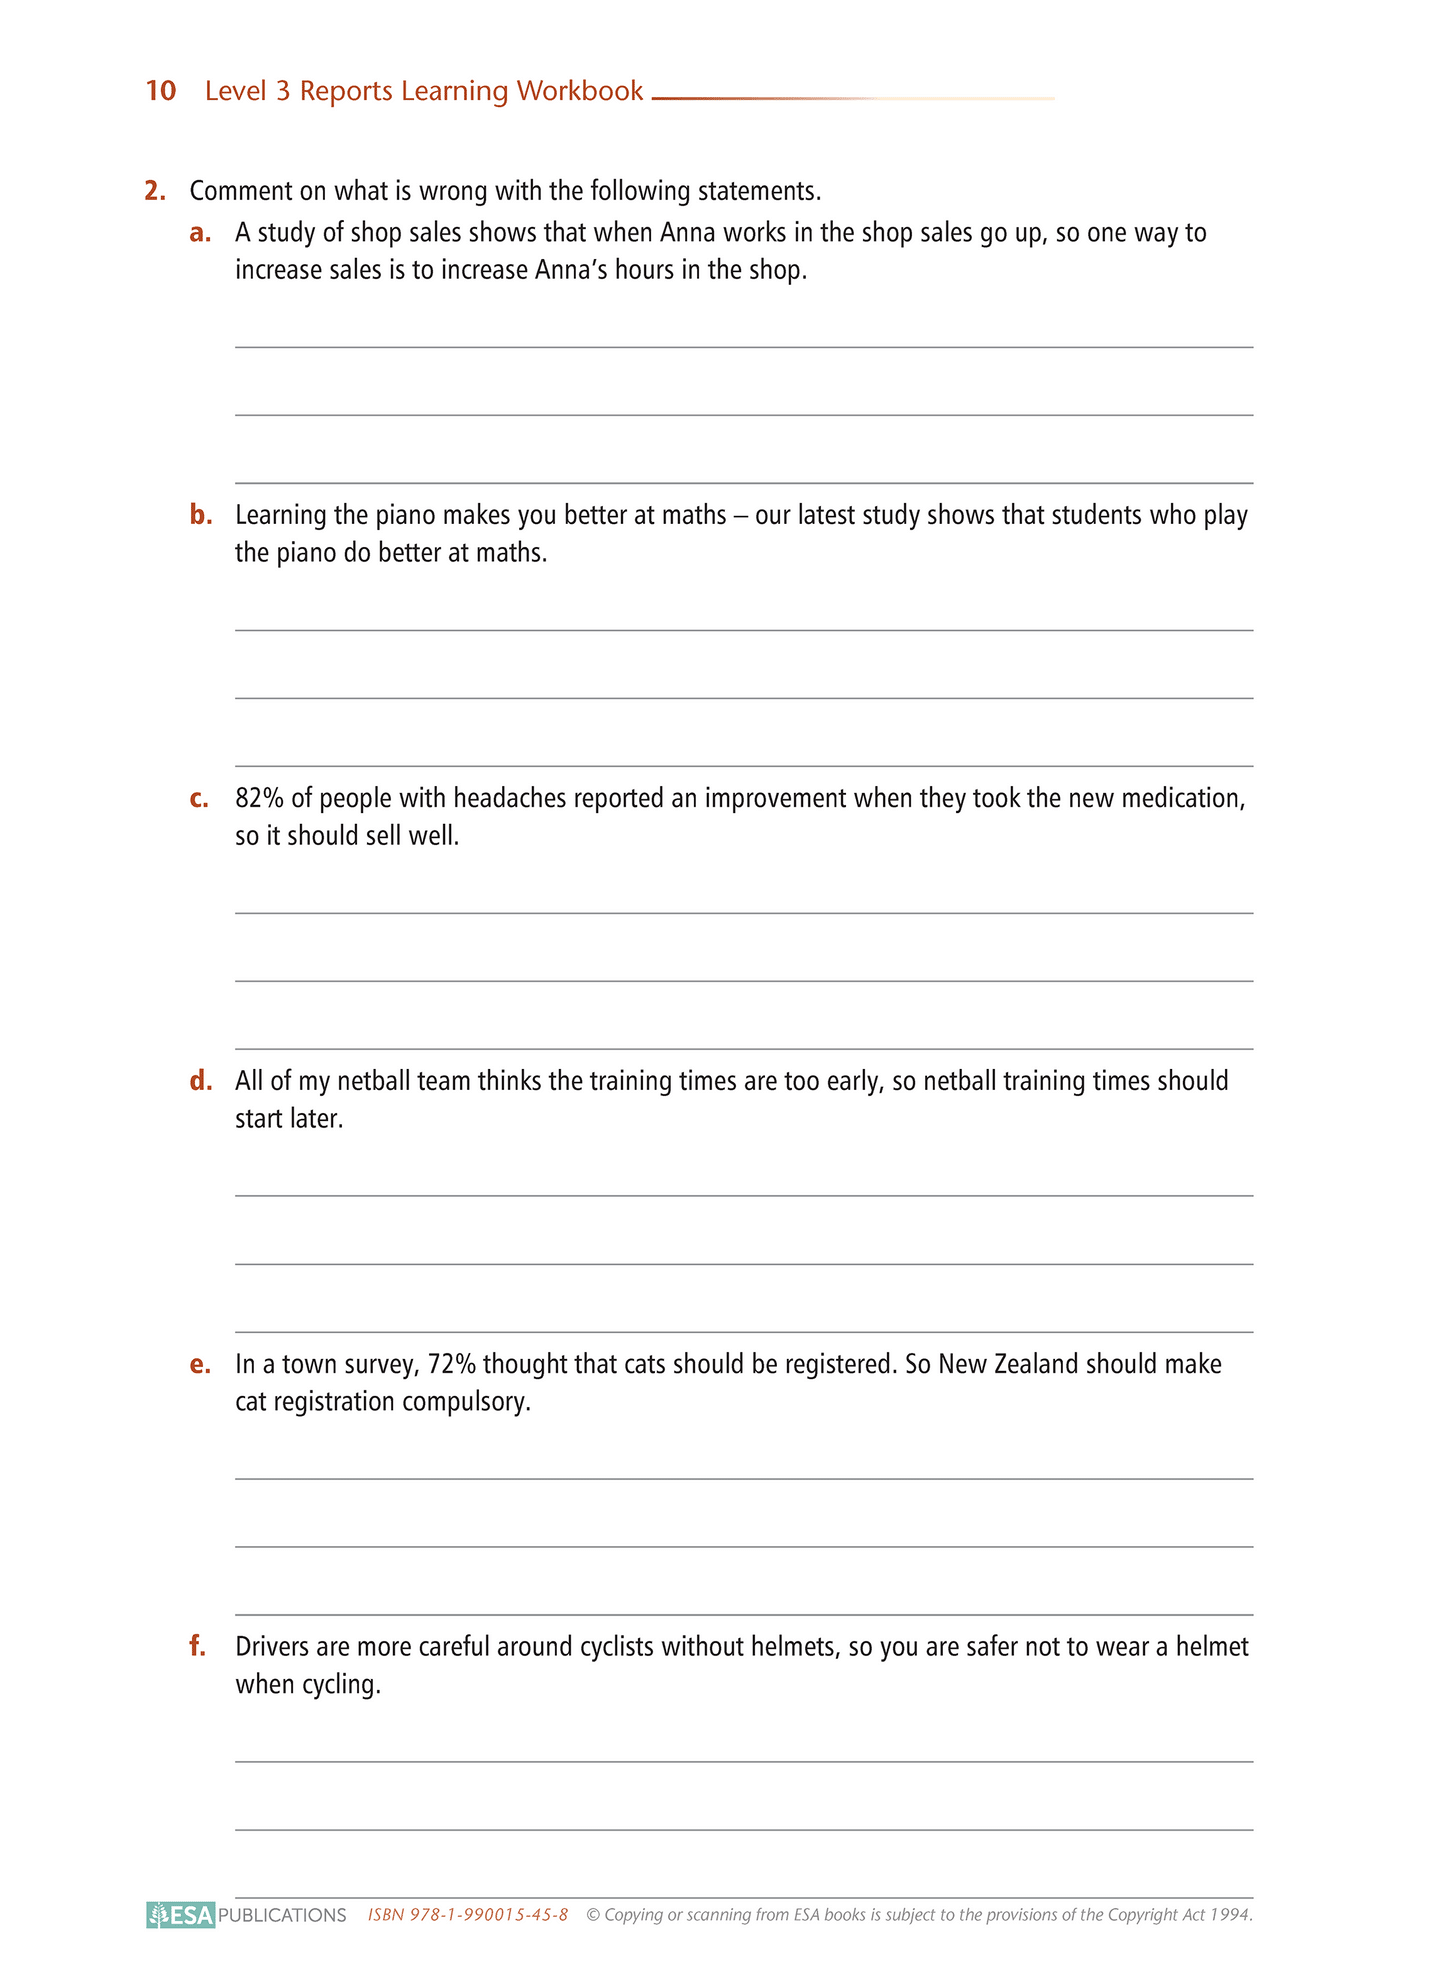 Level 3 Reports 3.12 Learning Workbook - SPECIAL (damaged stock at $5 each)